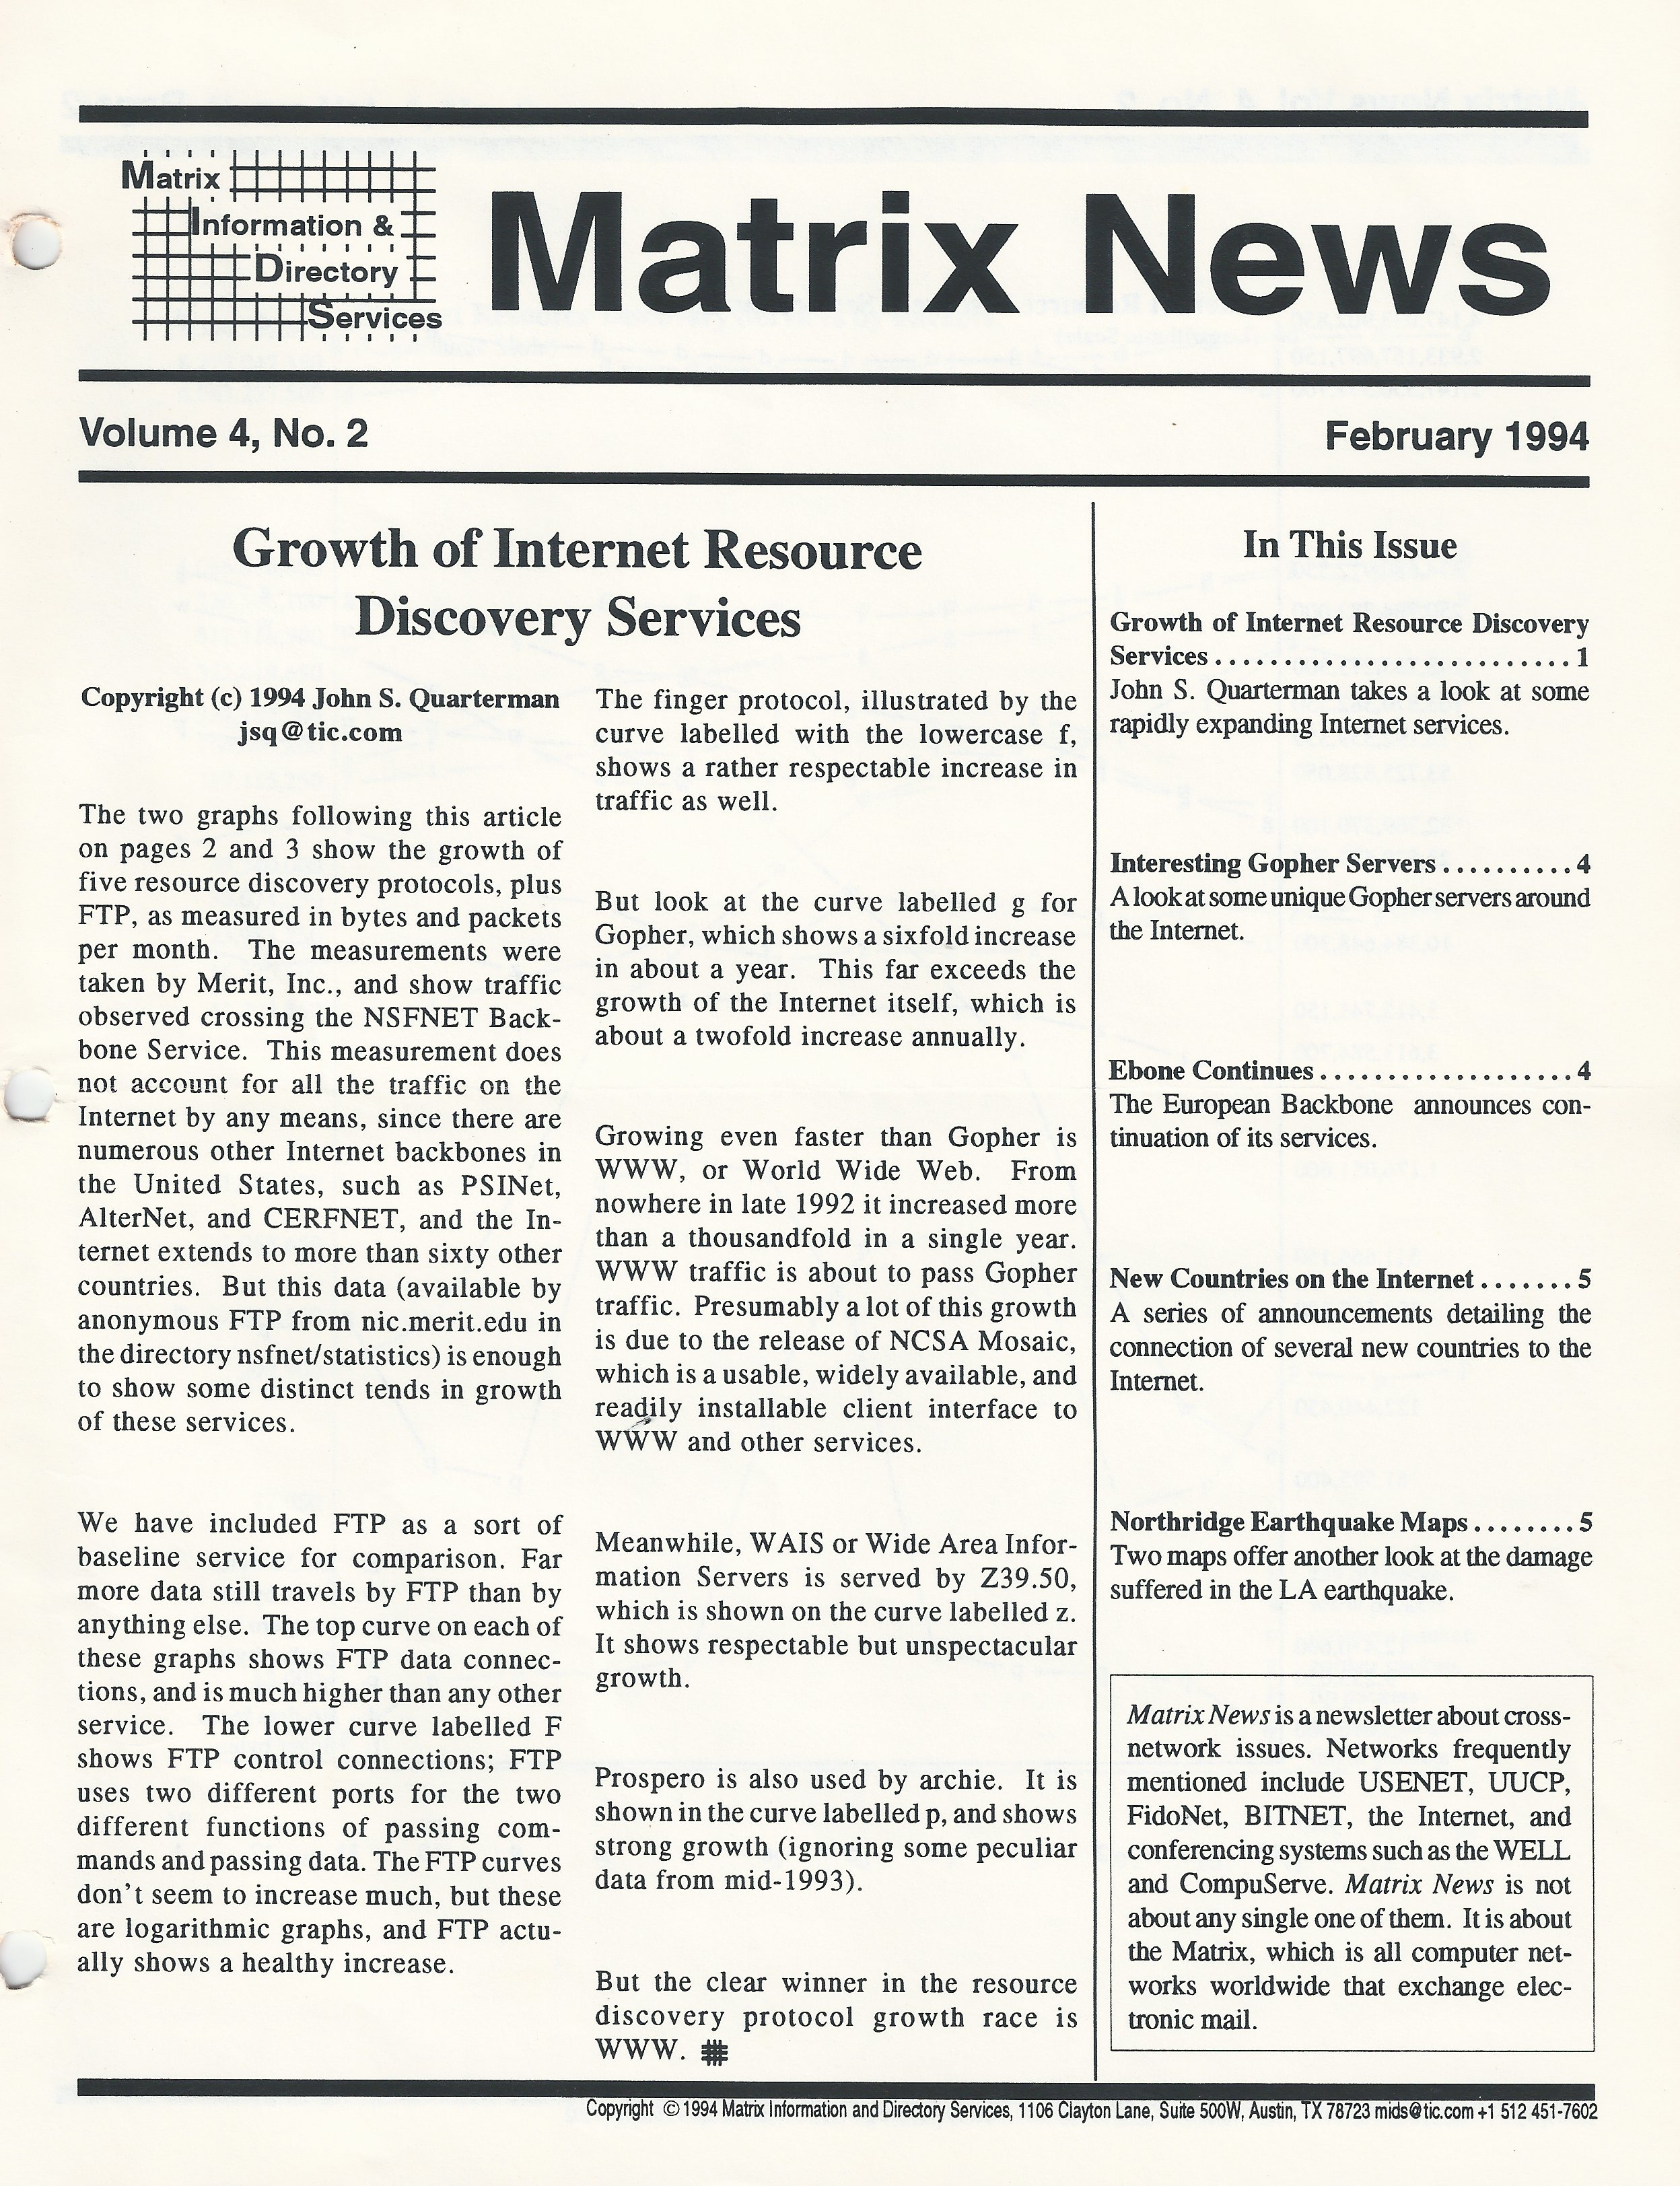 Growth of Internet Resource Discovery Services, by John S. Quarterman, 